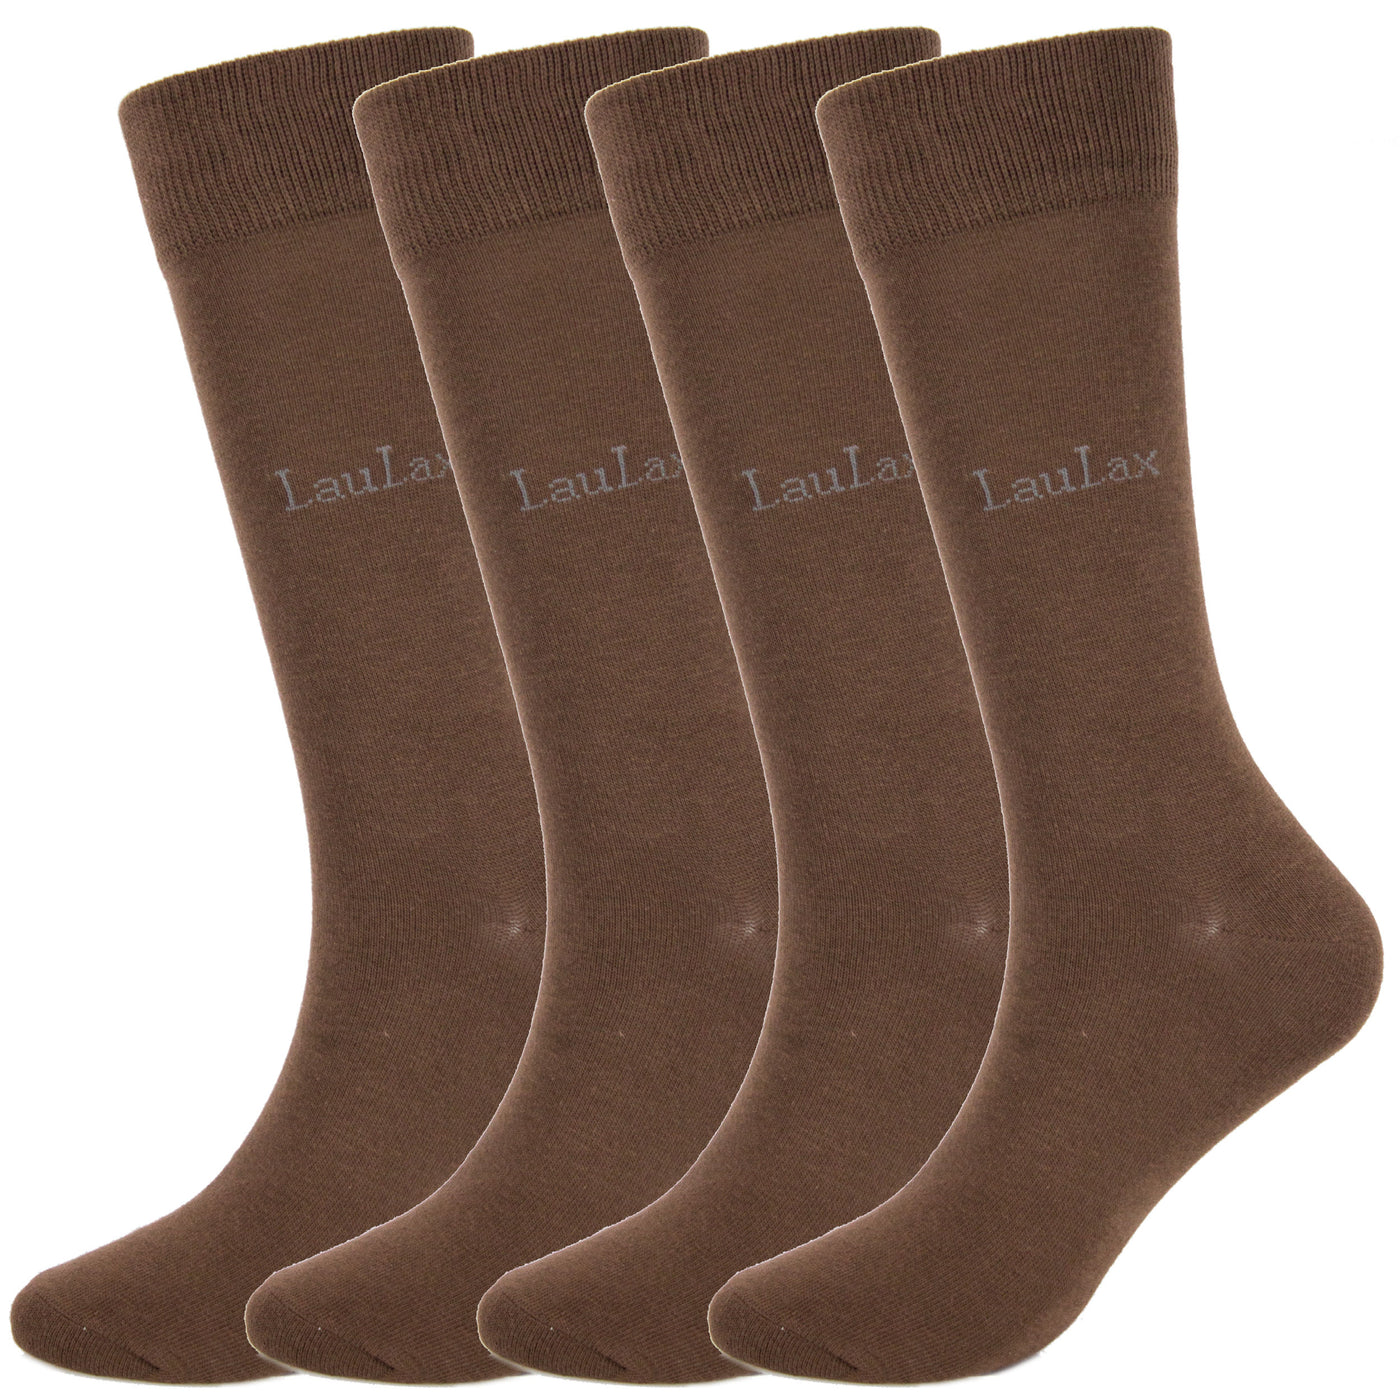 4 Pairs High Quality Finest Combed Cotton Dress Socks, Coffee, Gift Set